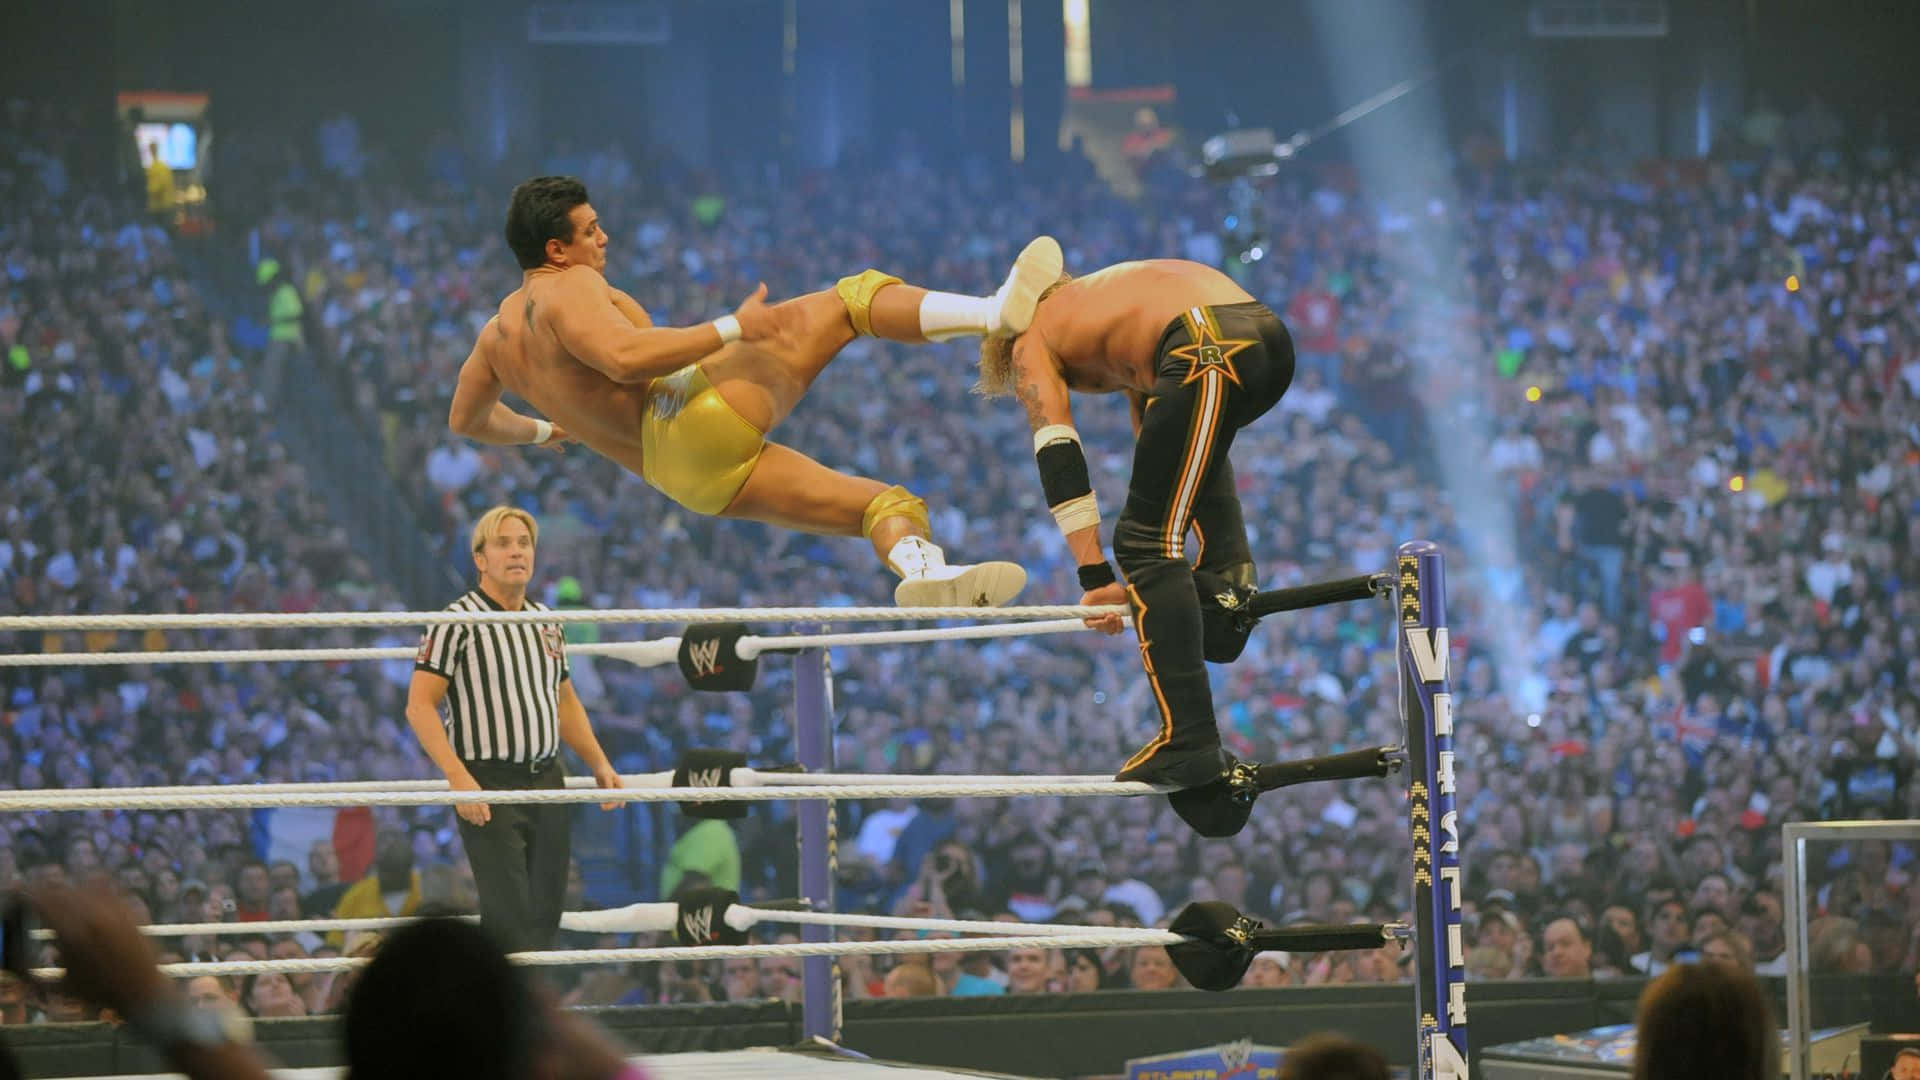 Alberto Del Rio executing a dramatic kick on his opponent in the WWE ring Wallpaper